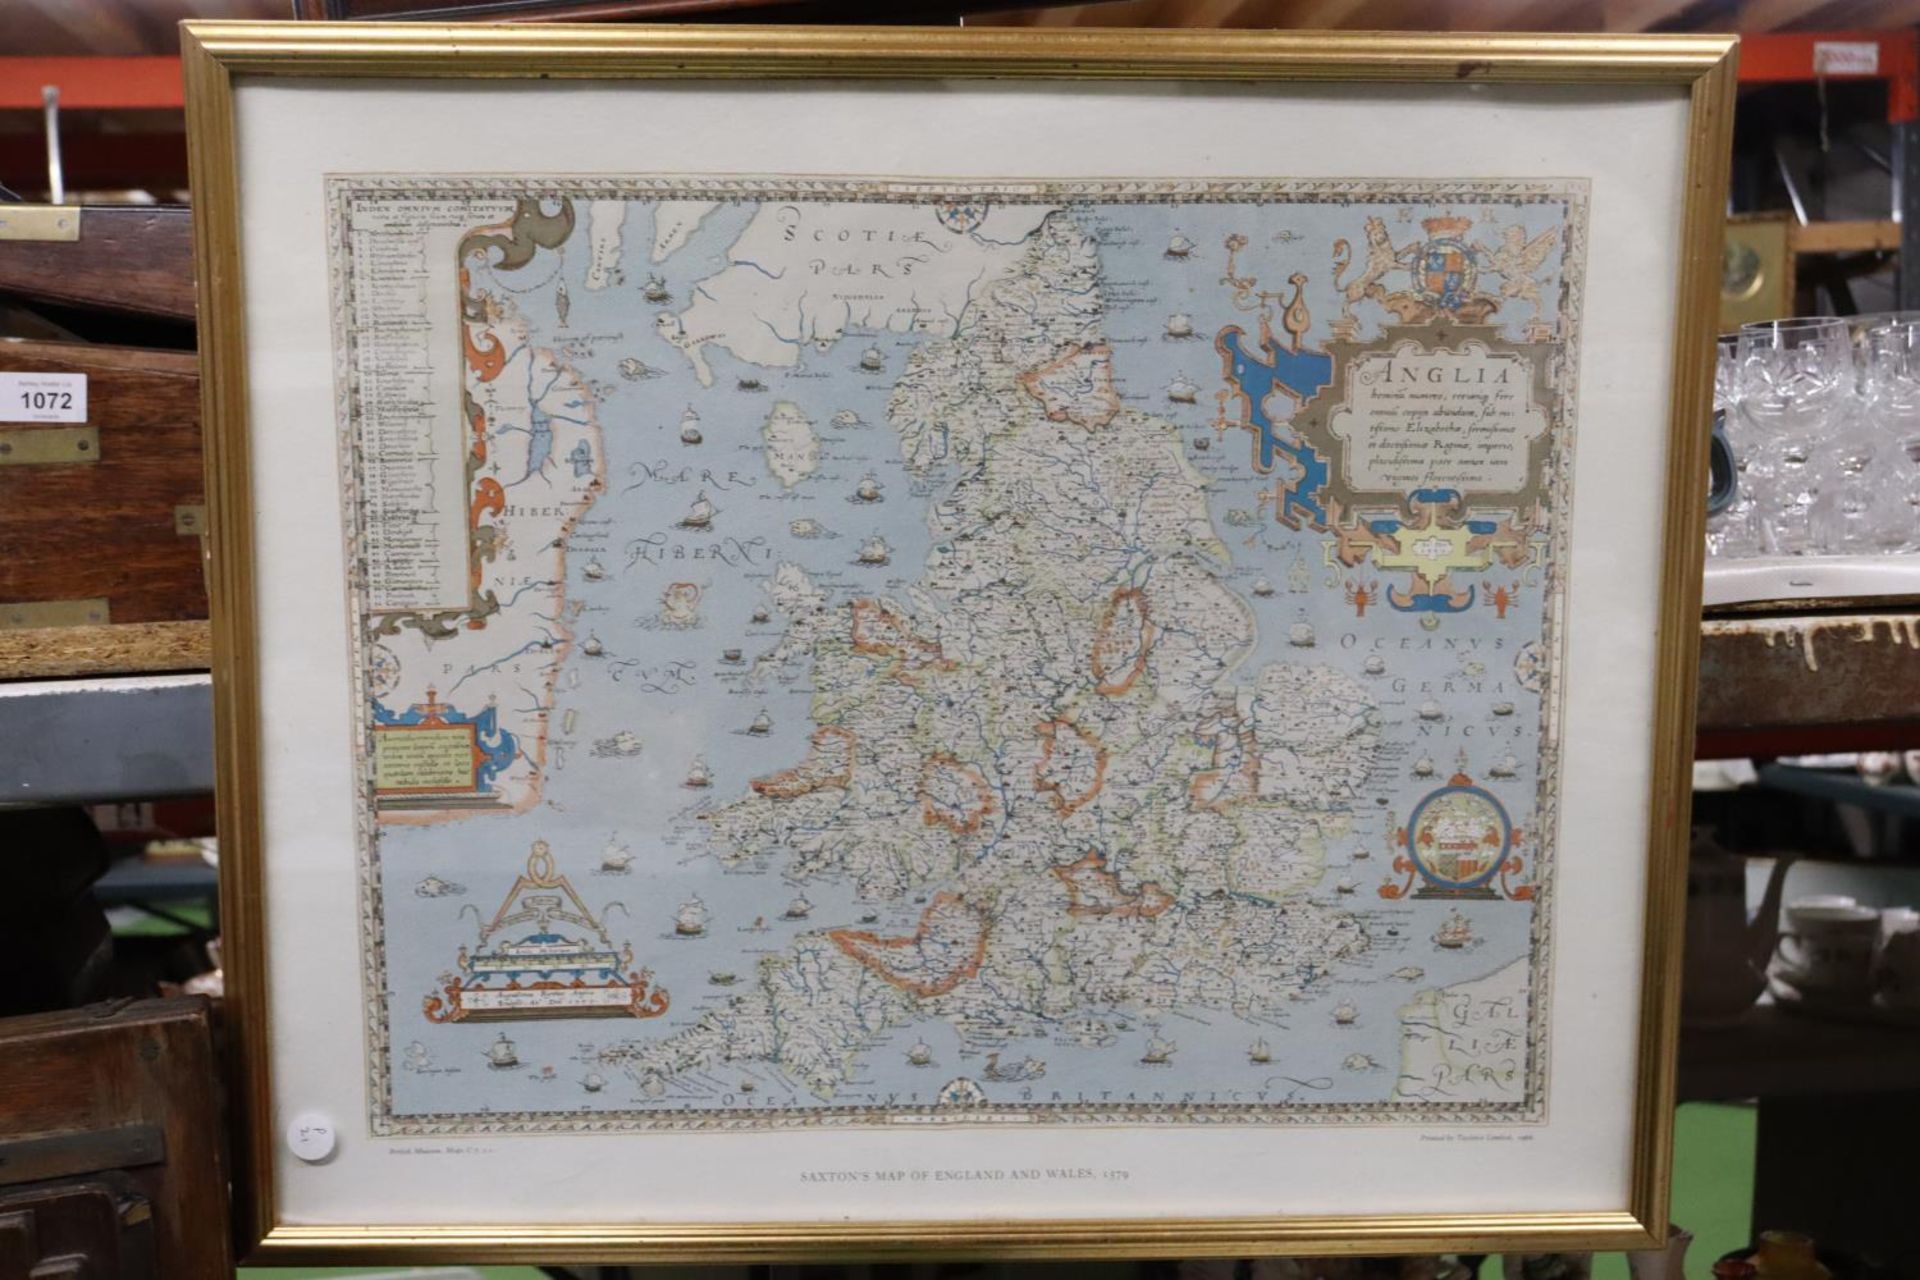 TWO FRAMED MAPS, ONE OF SHROPSHIRE 1879-1899, THE OTHER A PRINT OF SAXTON'S MAP OF ENGLAND AND - Image 3 of 5